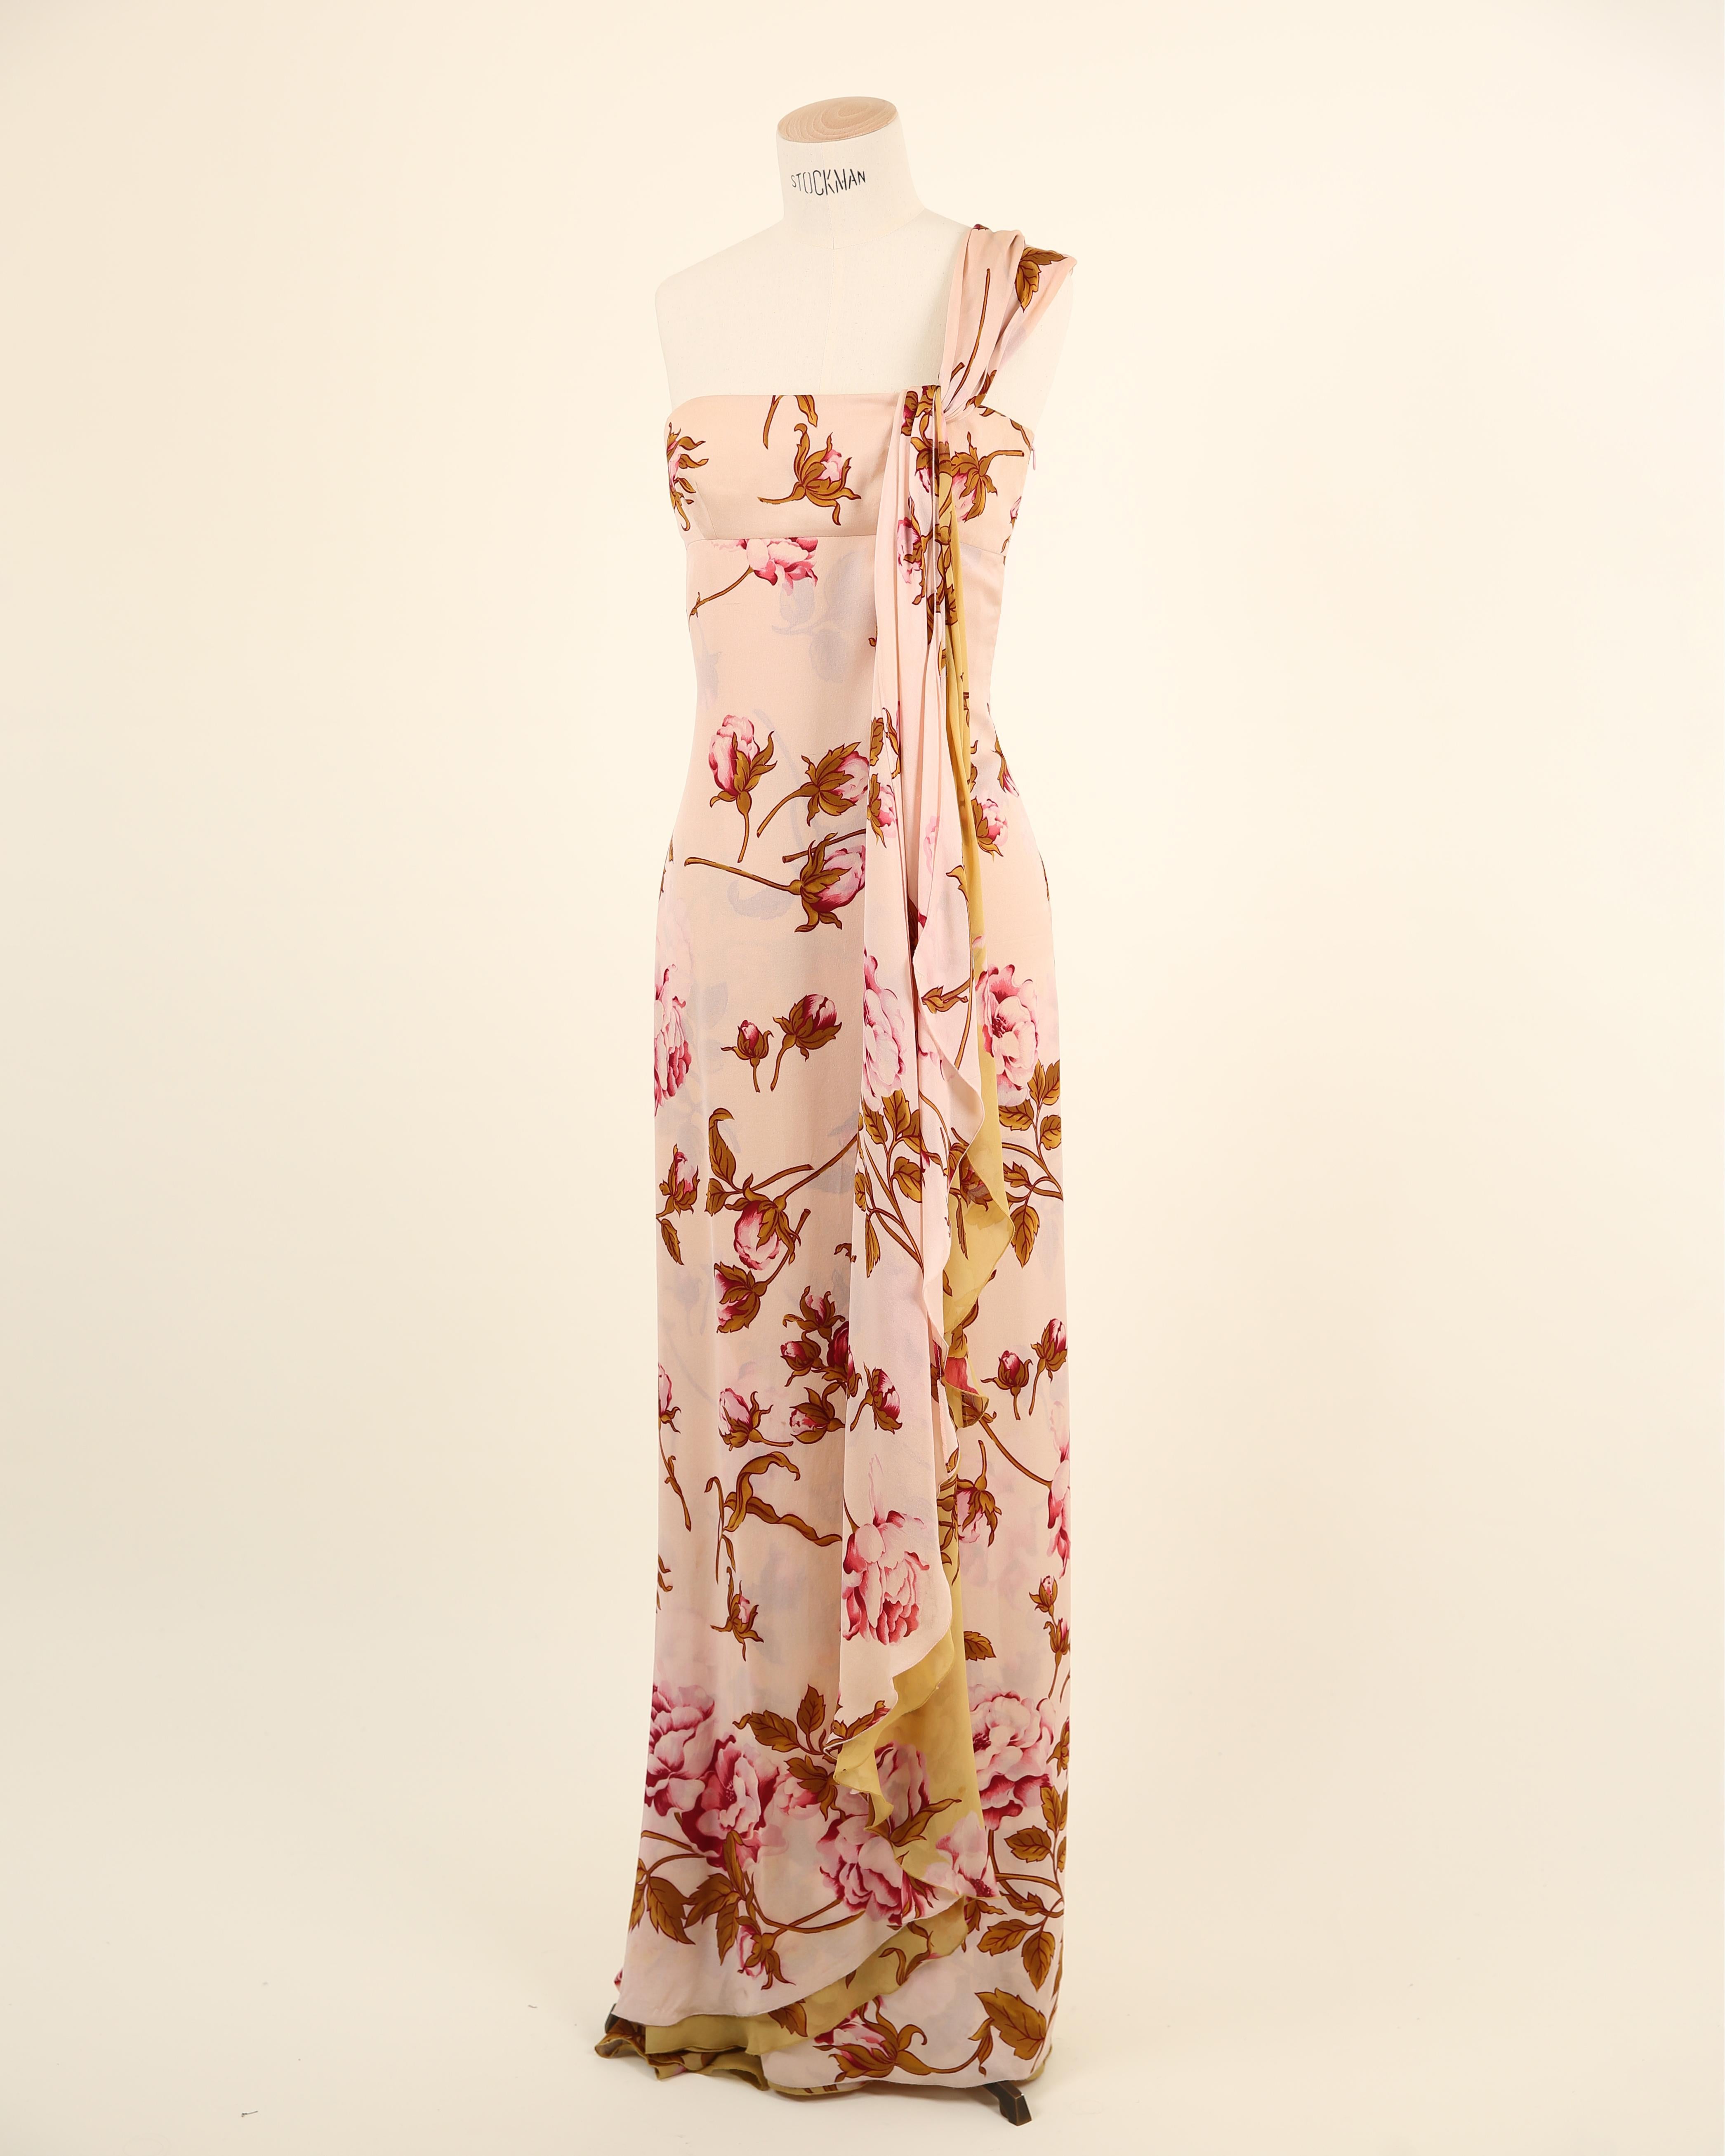 Women's Valentino S/S 06 pink yellow rose print floral one shoulder gown train dress For Sale